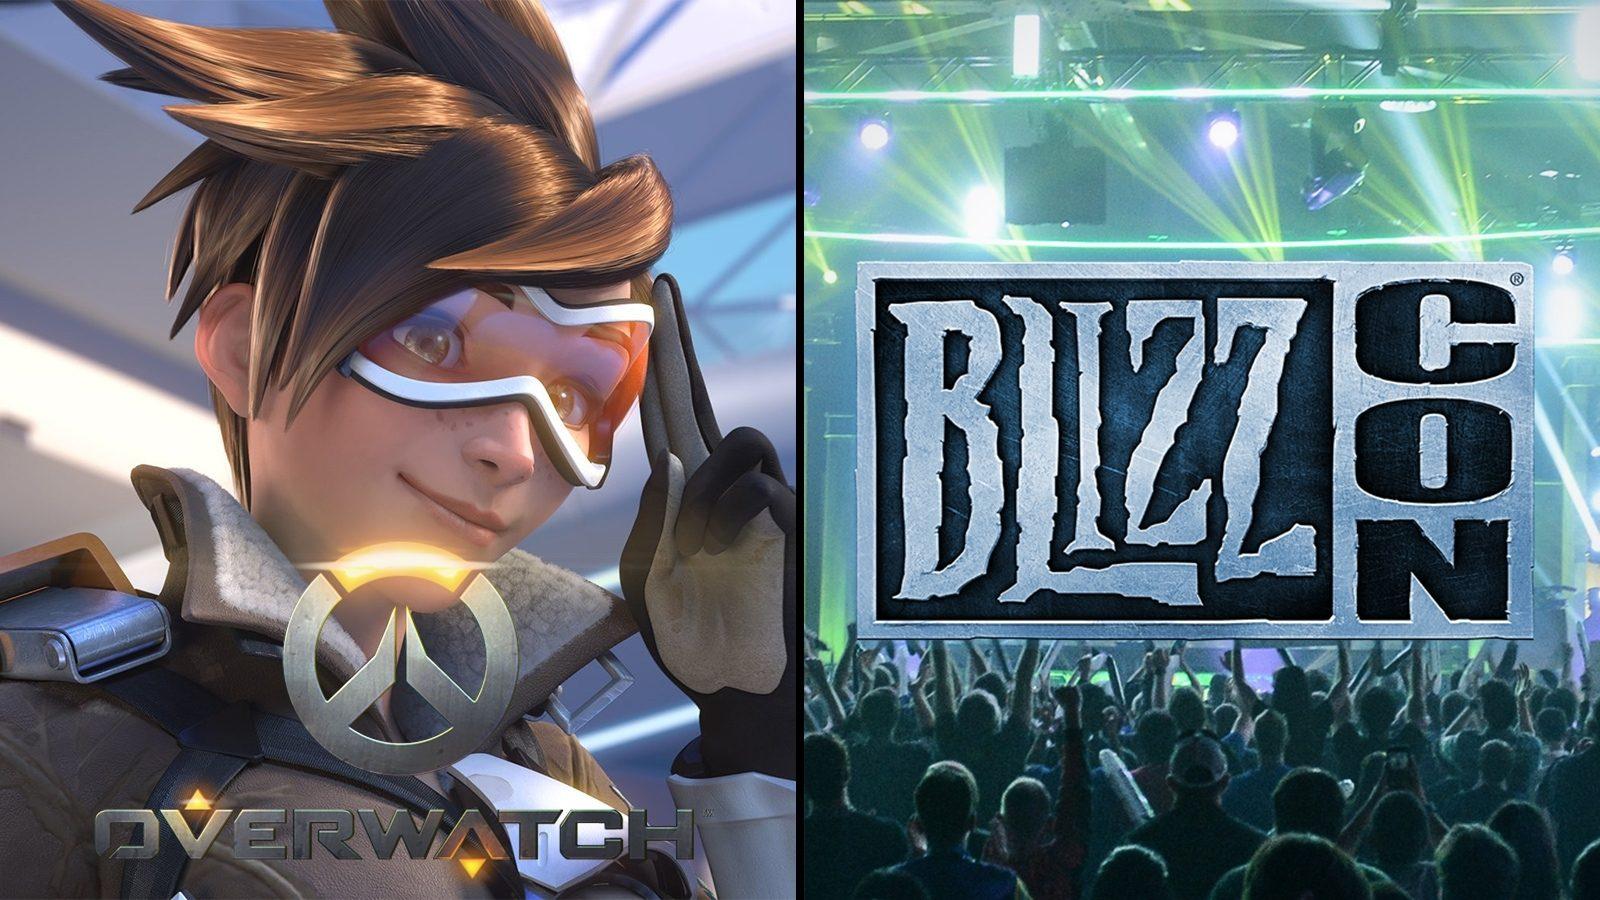 Every Heroes of the Storm character is free for BlizzCon